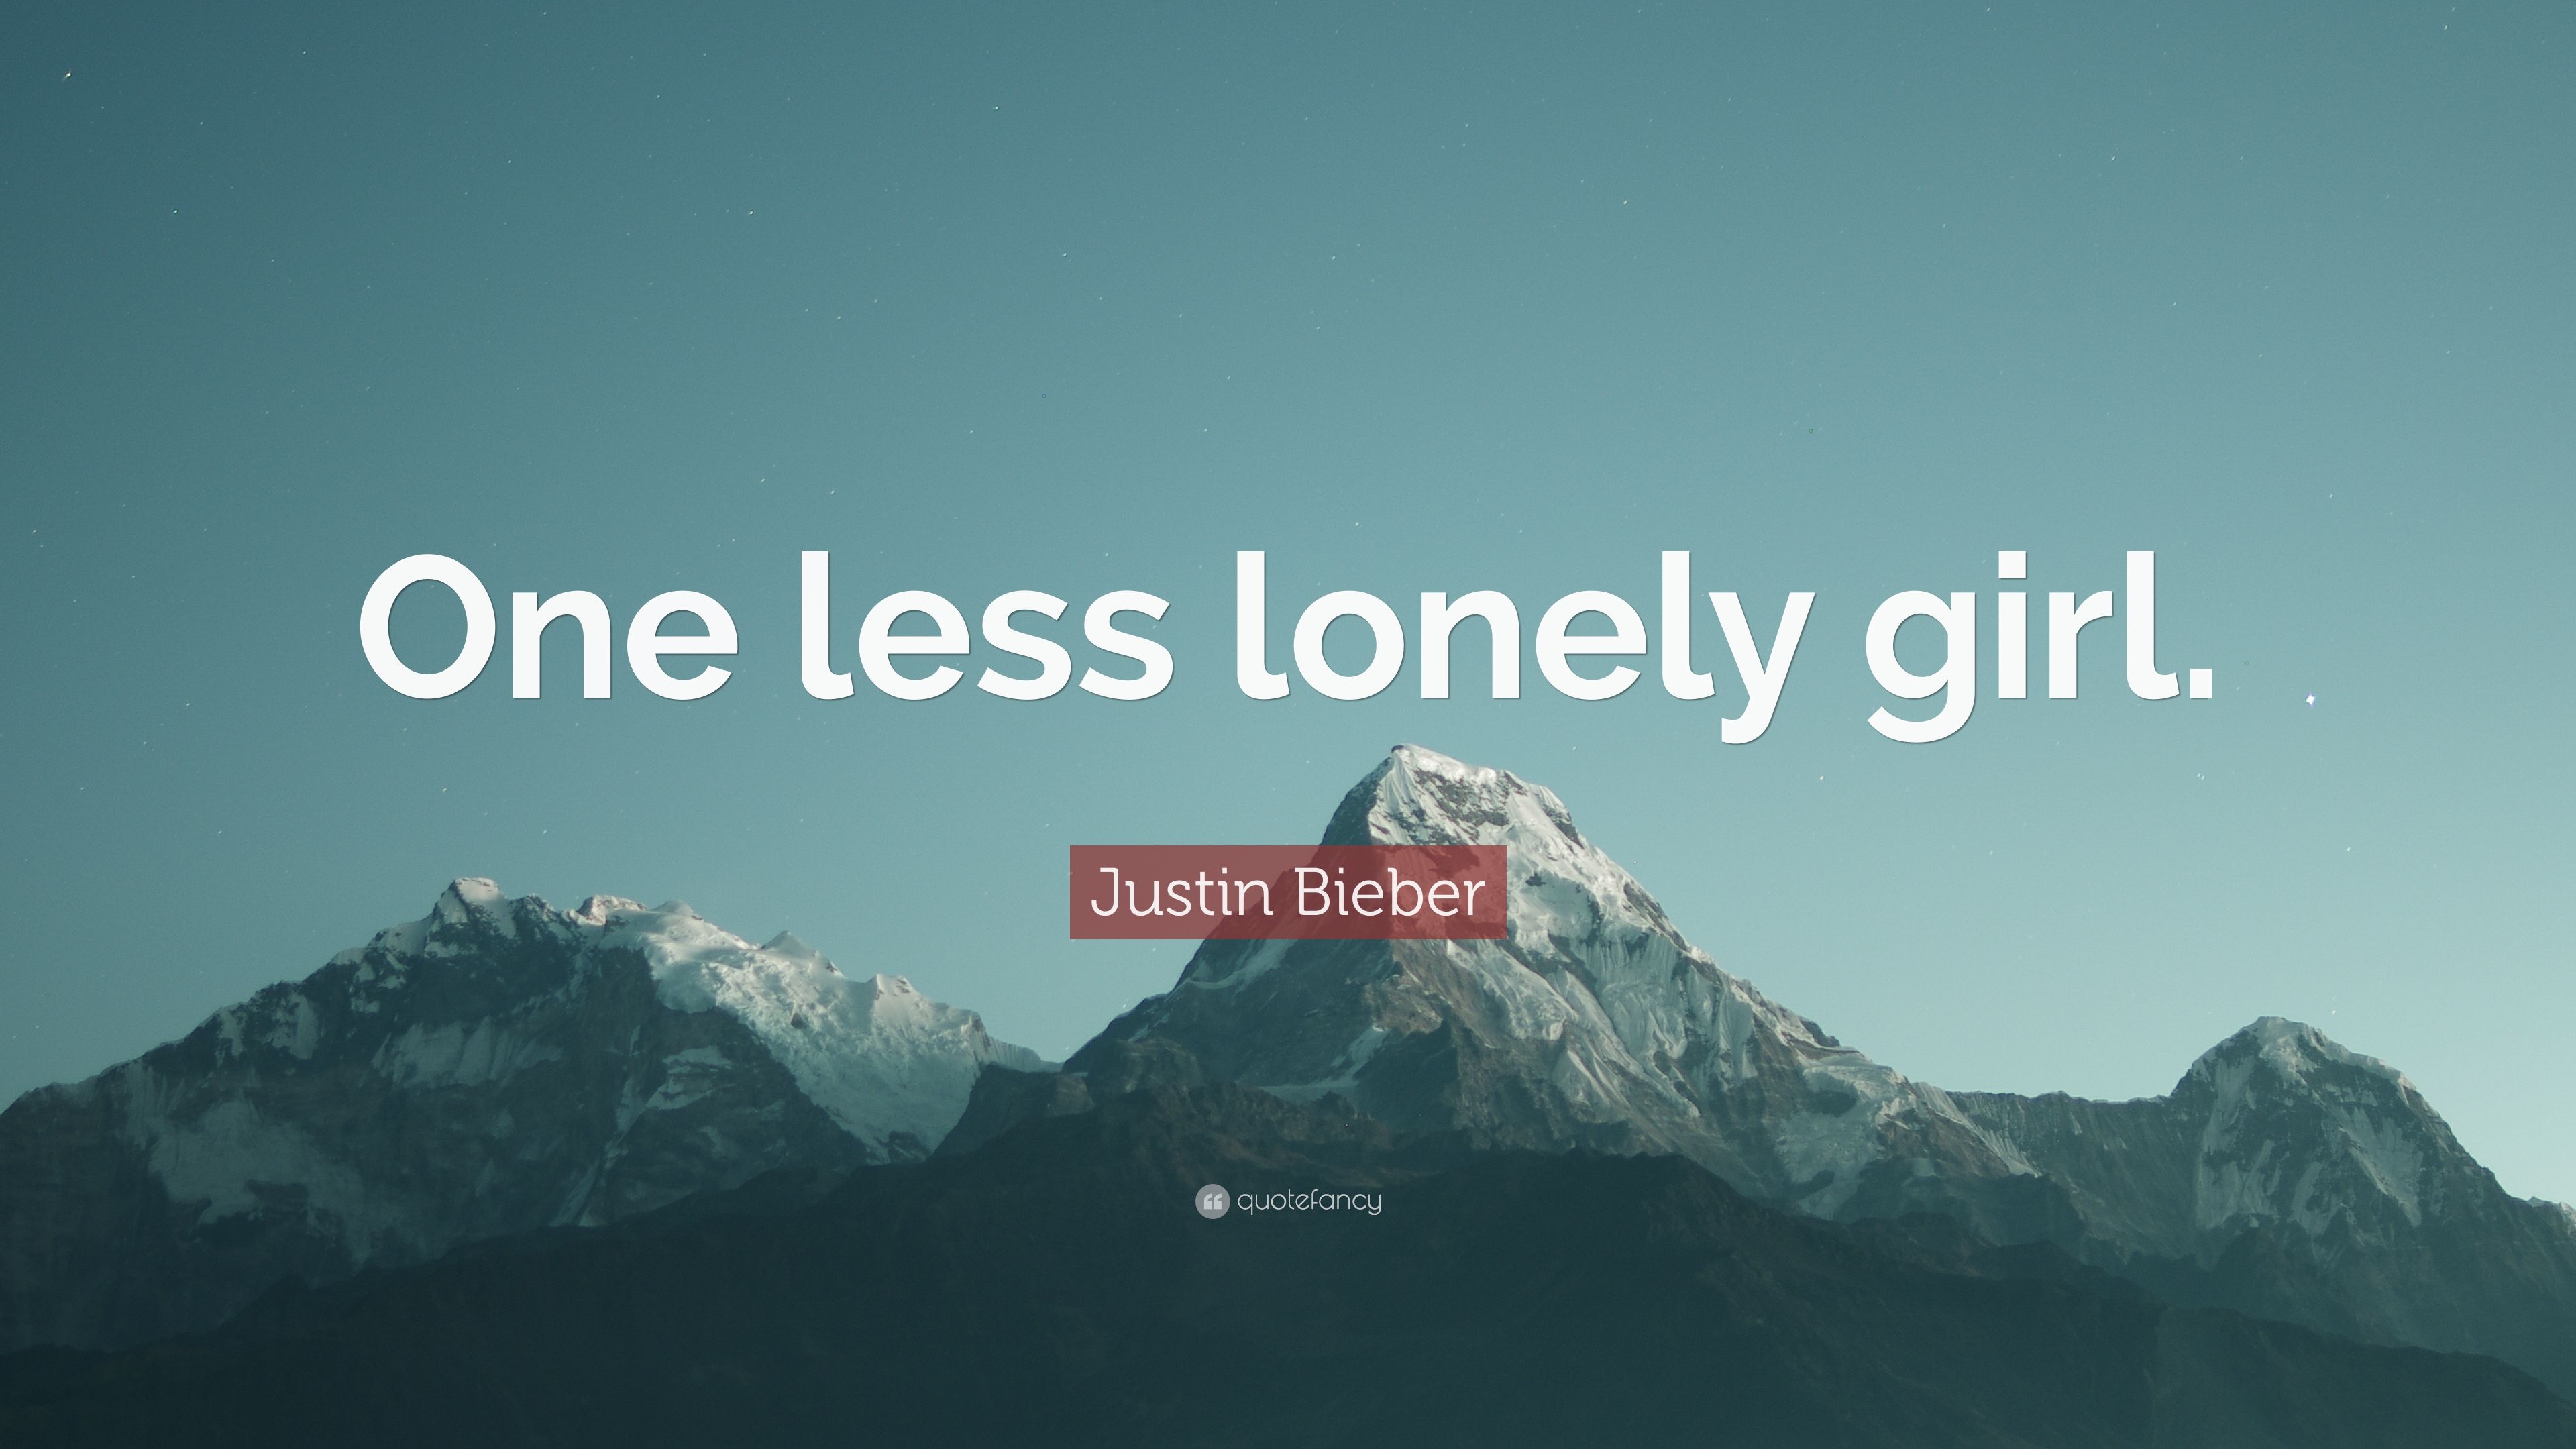 Justin Bieber Quote: “One less lonely girl.” 10 wallpaper